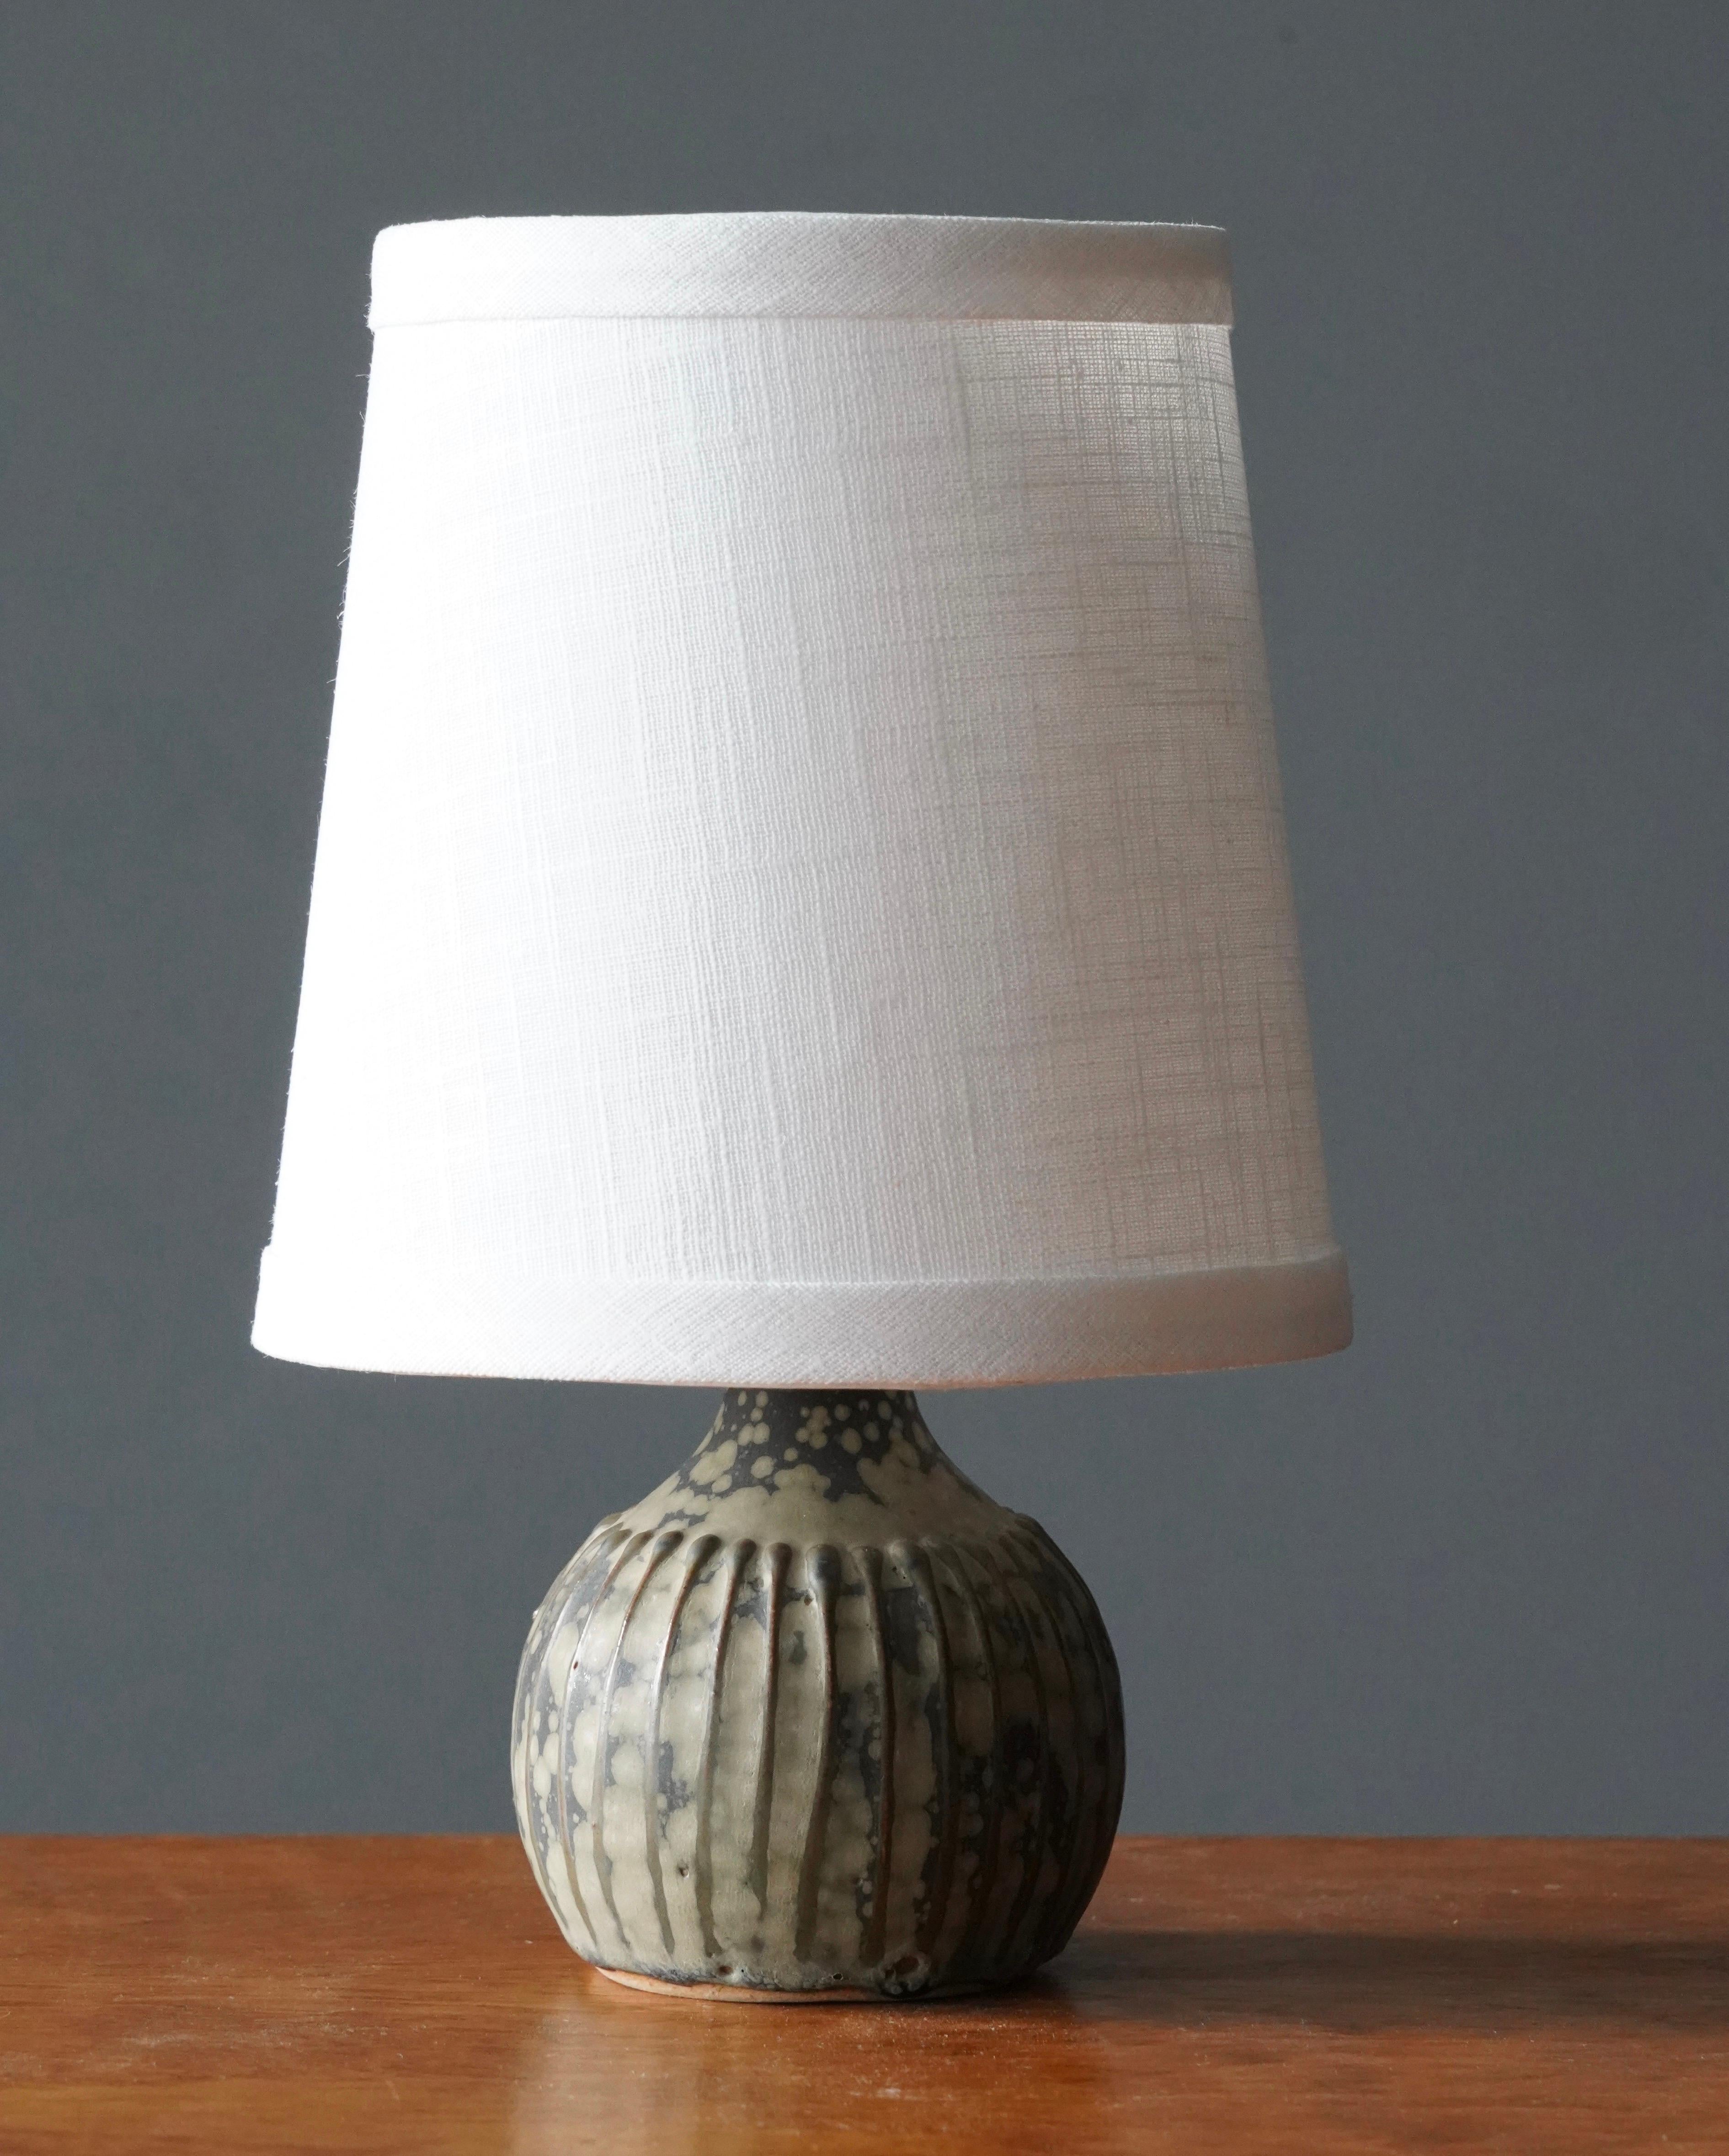 A small table lamp. Produced and designed by Rolf Palm, Sweden.

Dimensions listed are without shade. 
Dimensions with lampshade: height is 10 inches, width is 6.5 inches.
Dimensions of shade: top diameter is 4.5 inches, bottom diameter is 6